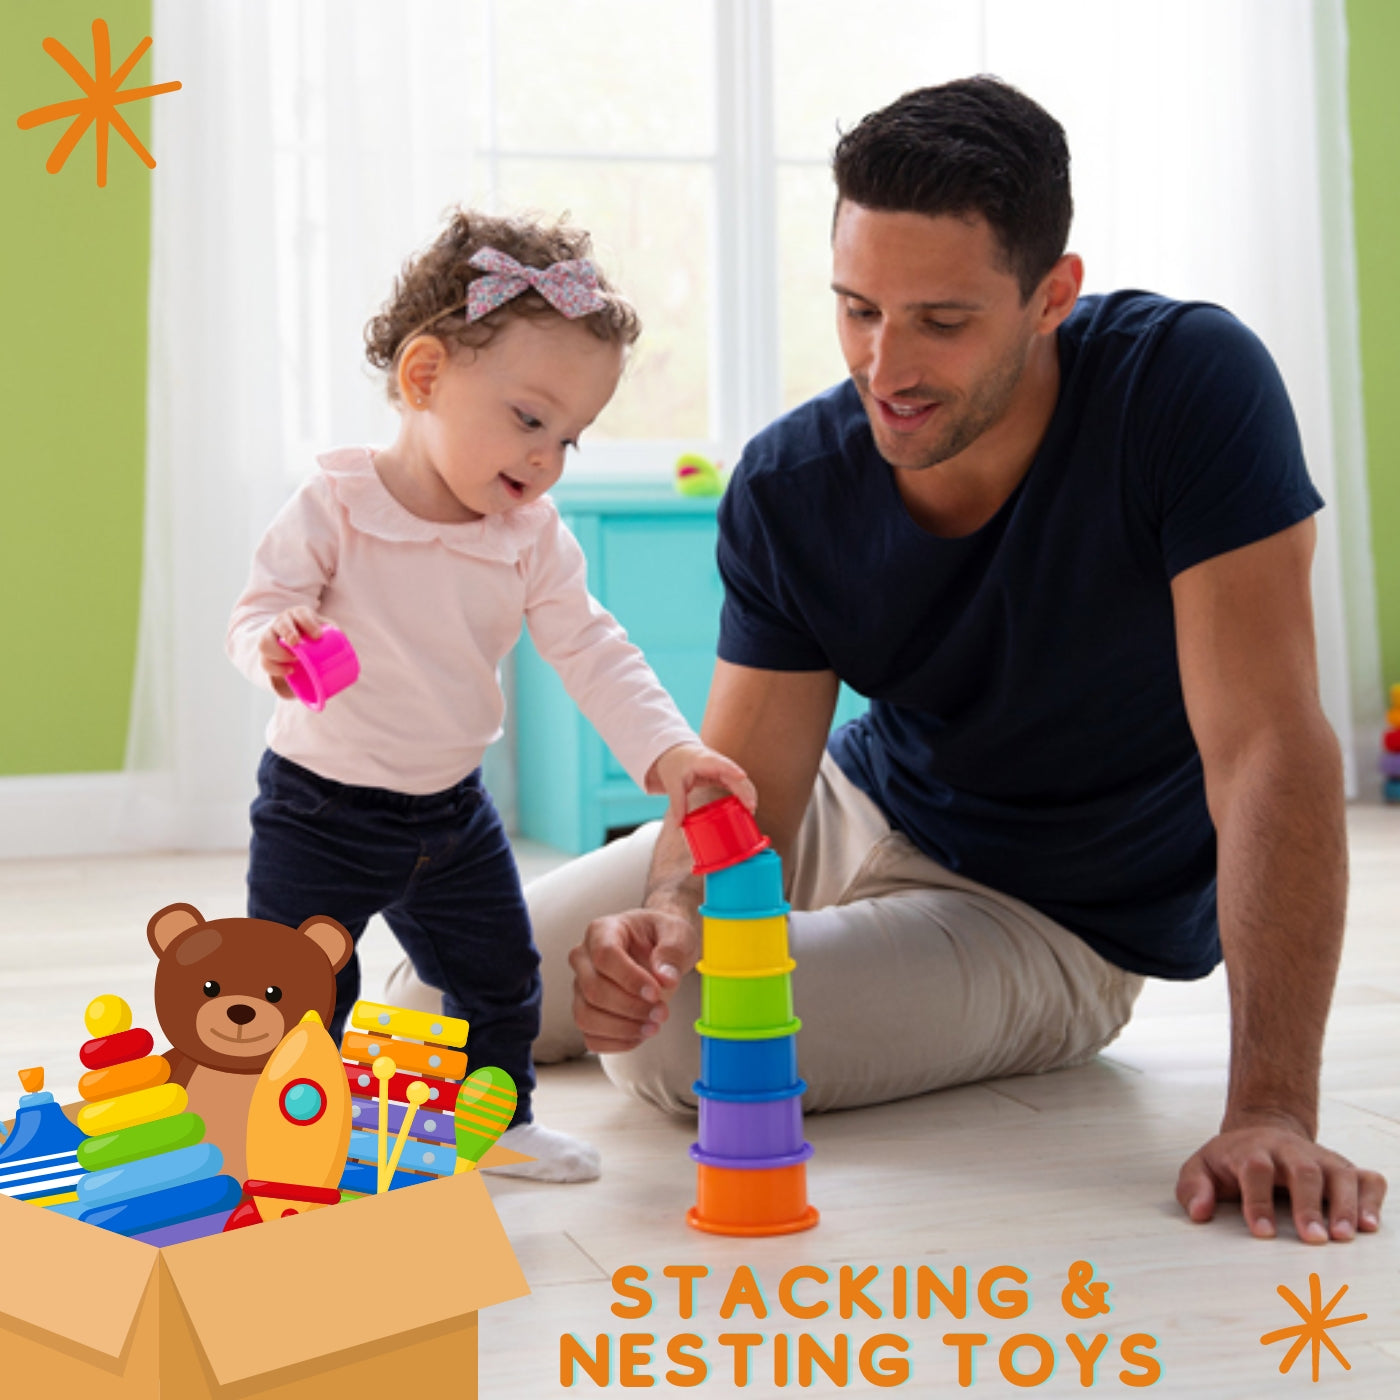 The Benefits of Stacking and Nesting Toys in Child Development